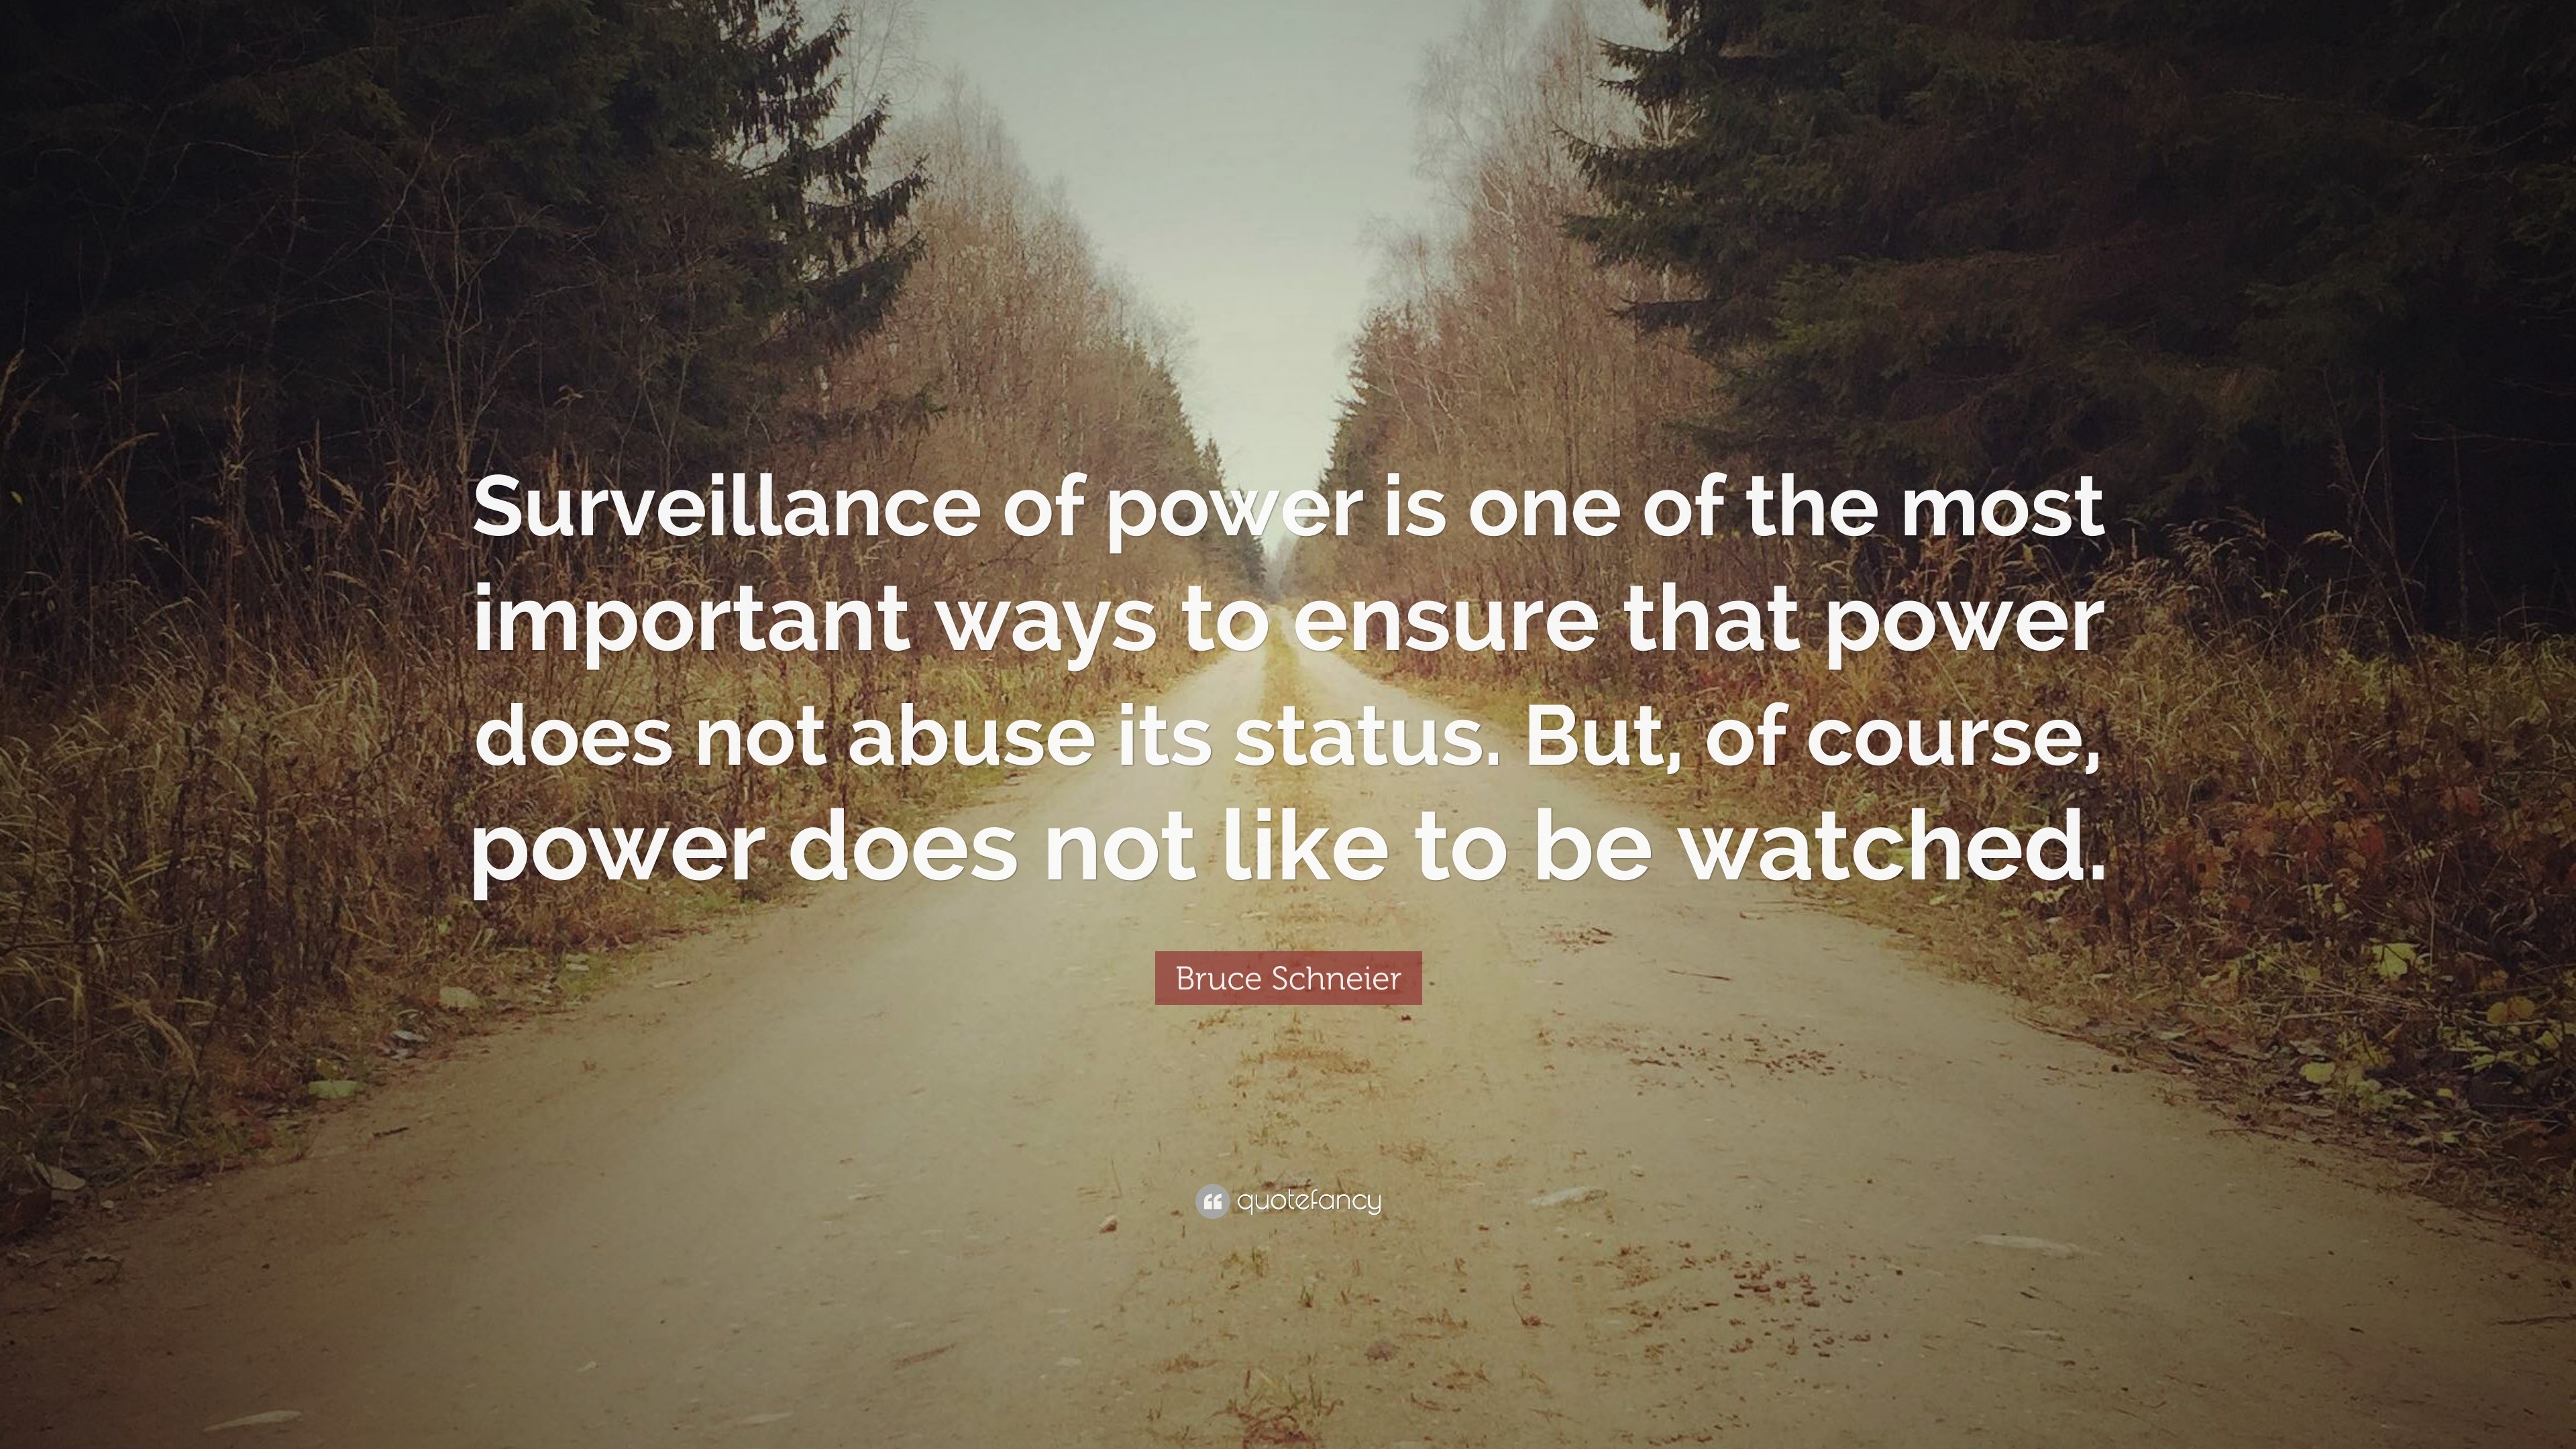 Bruce Schneier Quote Surveillance Of Power Is One Of The Most Important Ways To Ensure That Power Does Not Abuse Its Status But Of Course